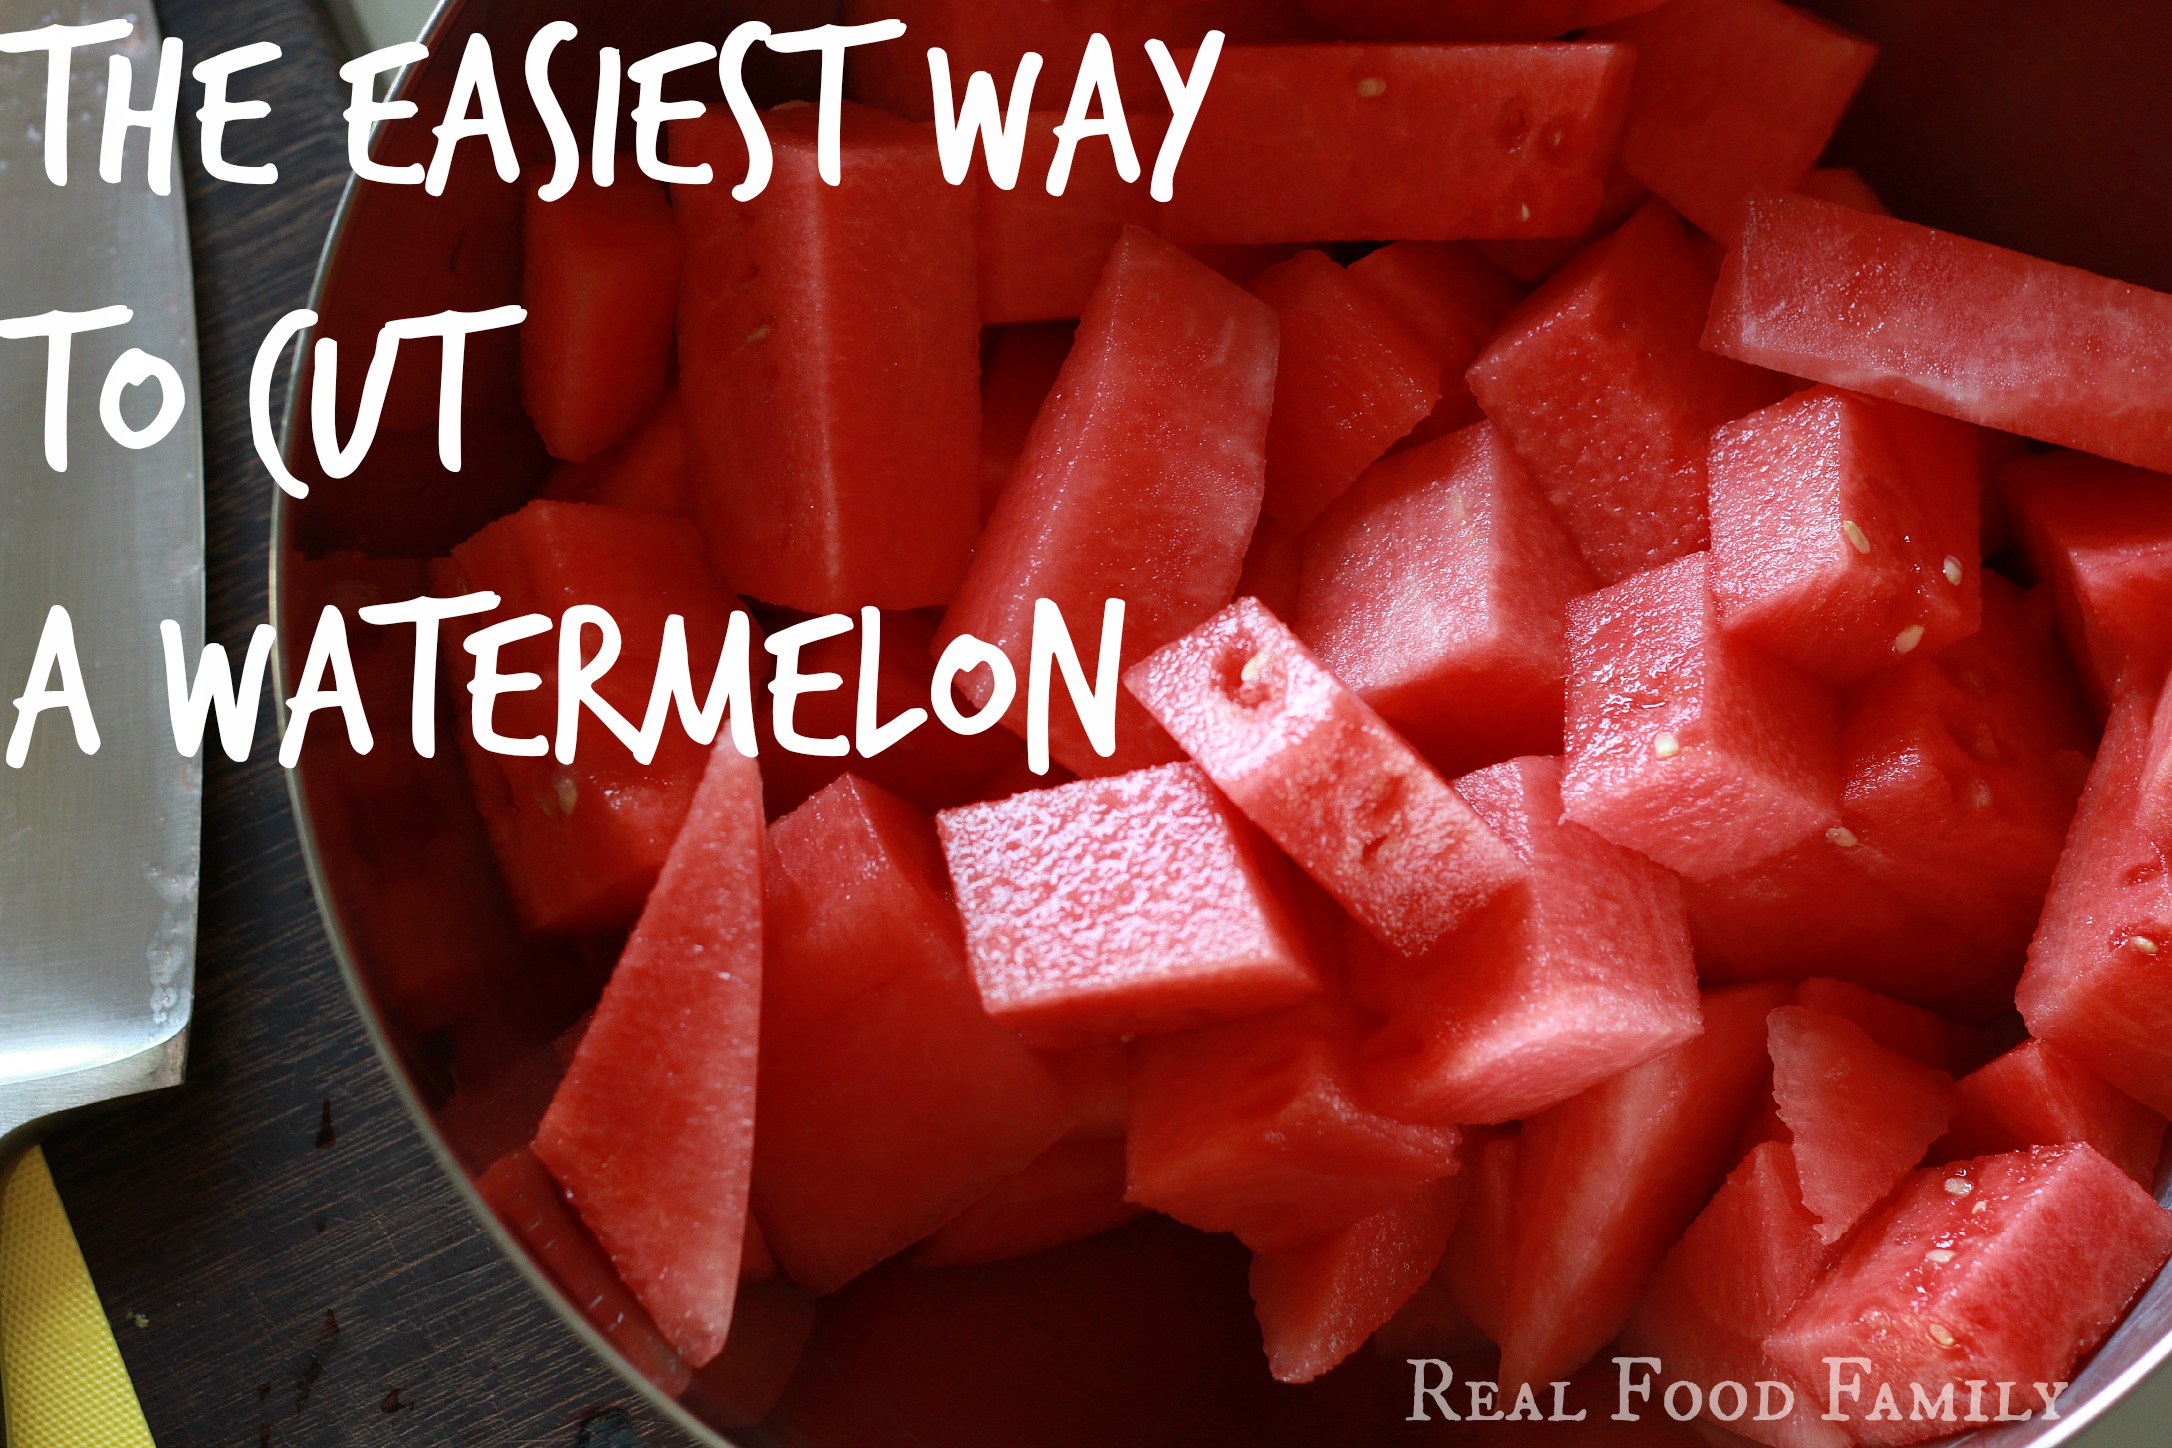 The Easiest Way to Cut a Melon!